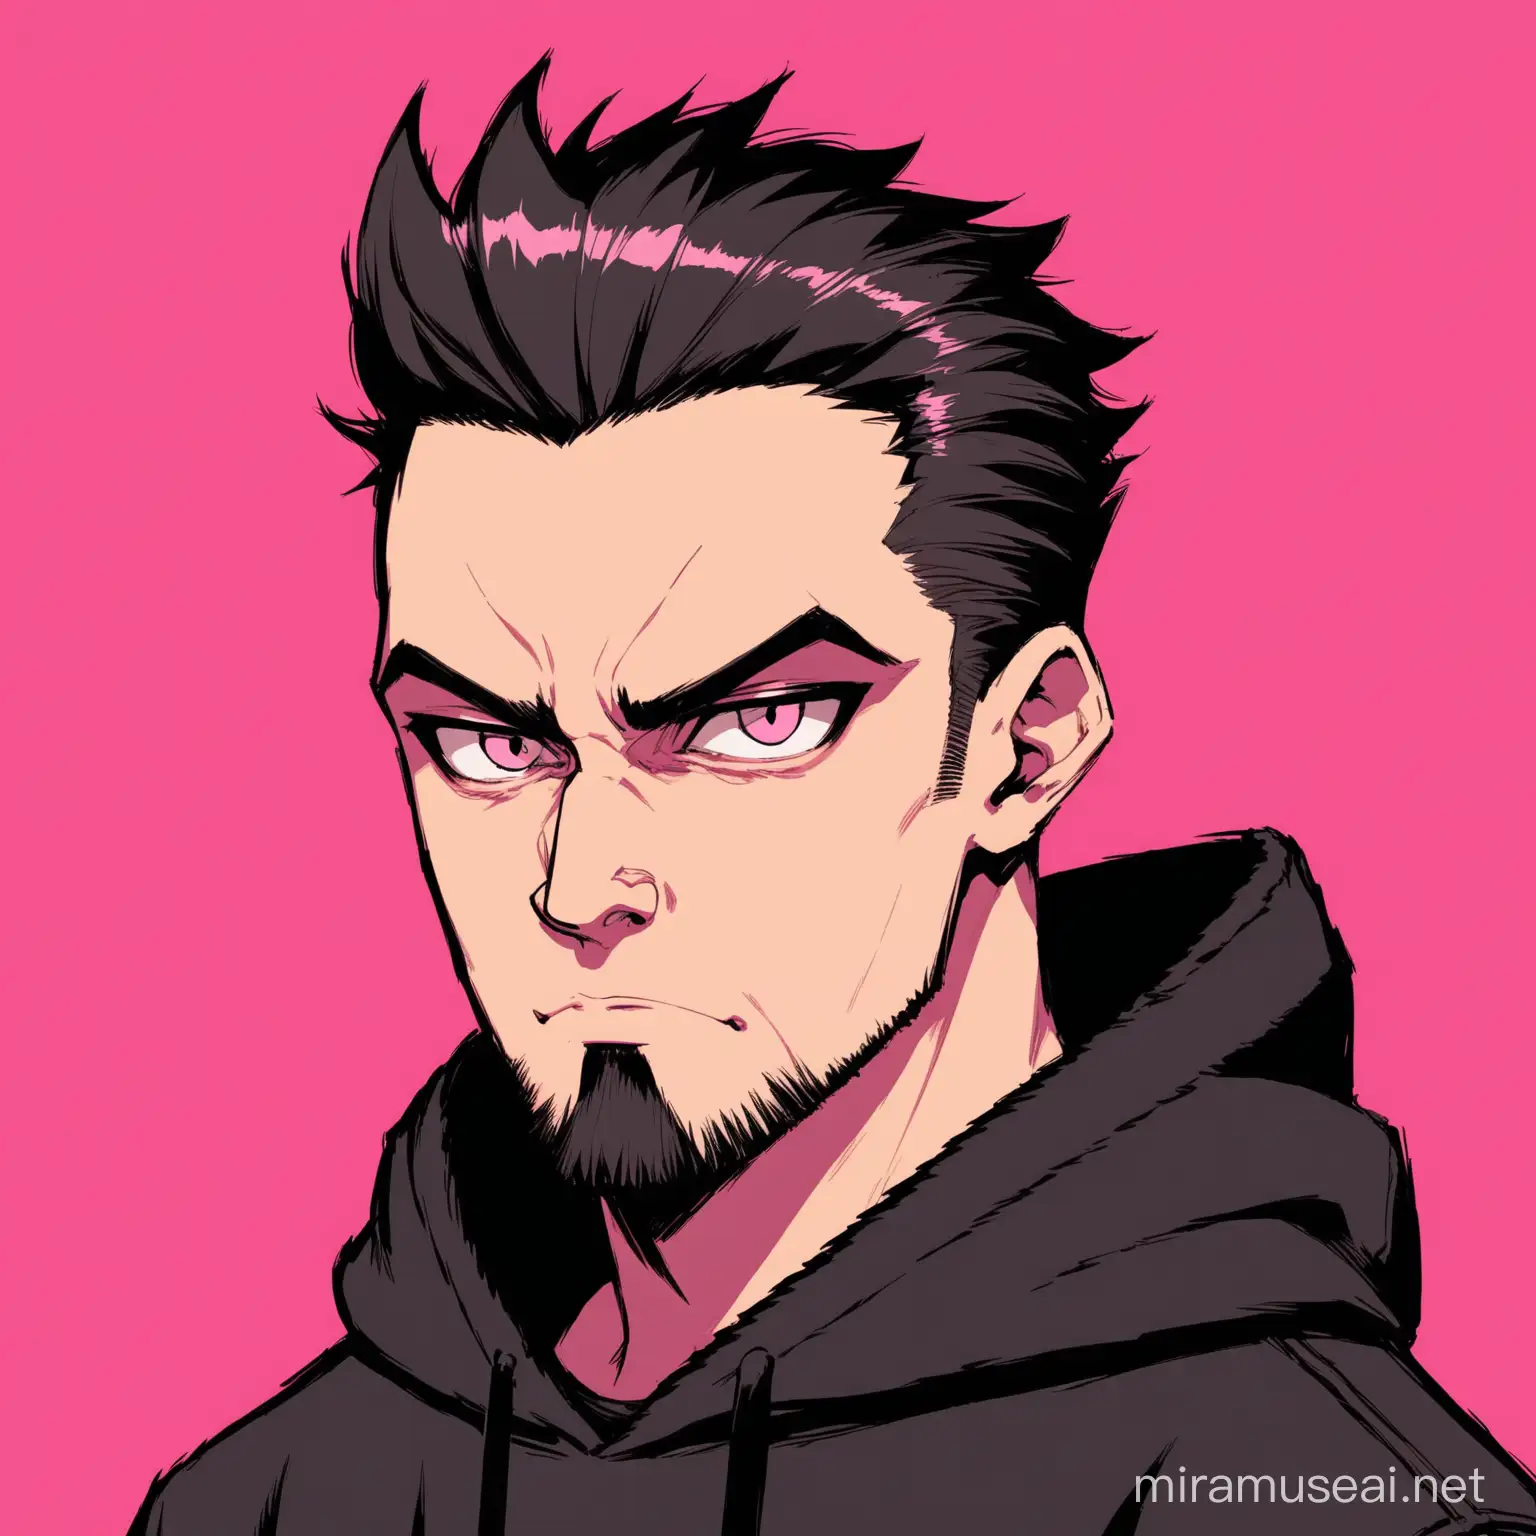 Stylish Hacker with Quiff Hair in Black Hoodie on Pink Background